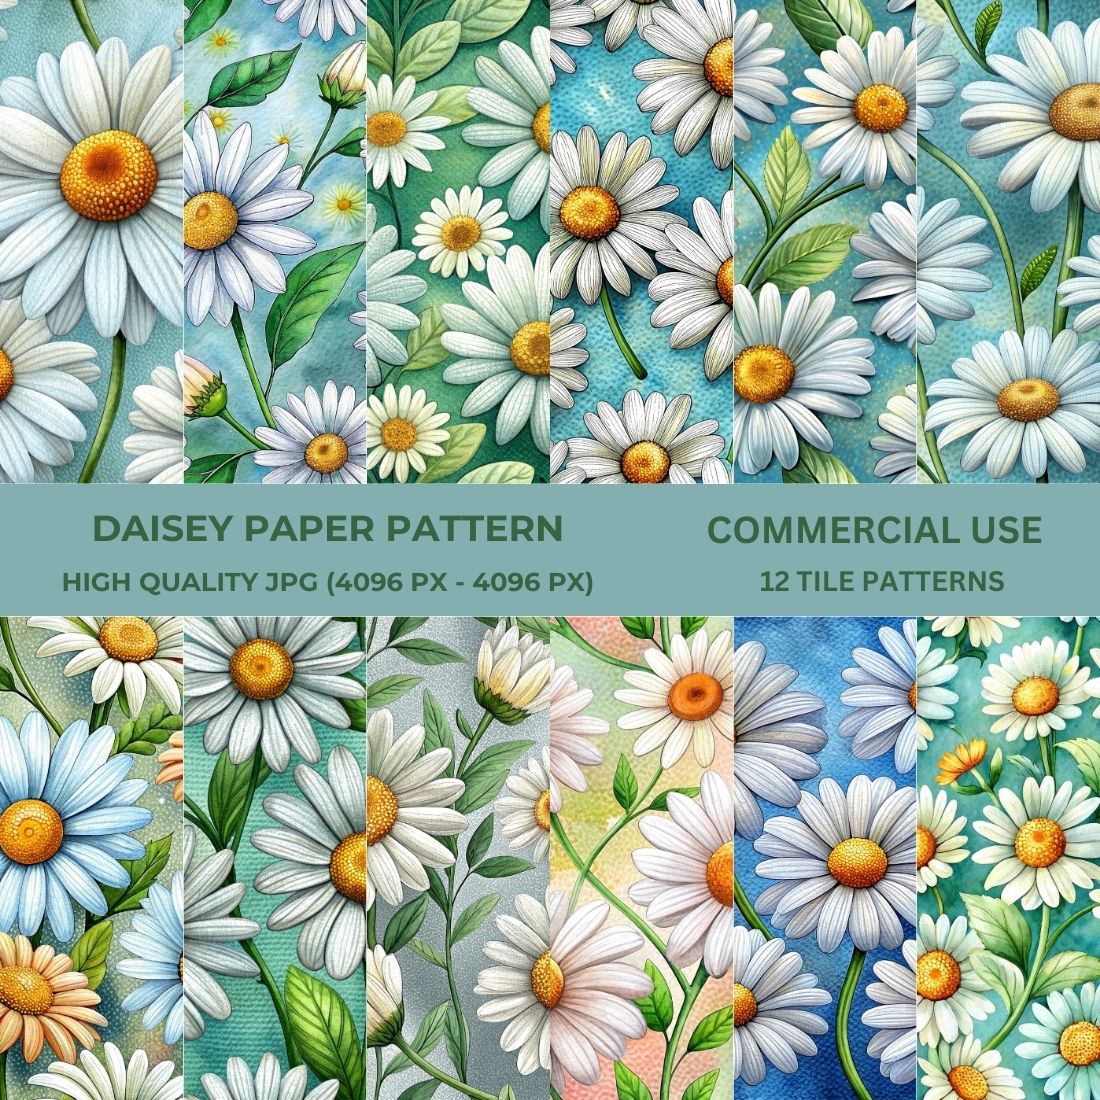 Daisey Paper Pattern Unleash Your Creativity cover image.